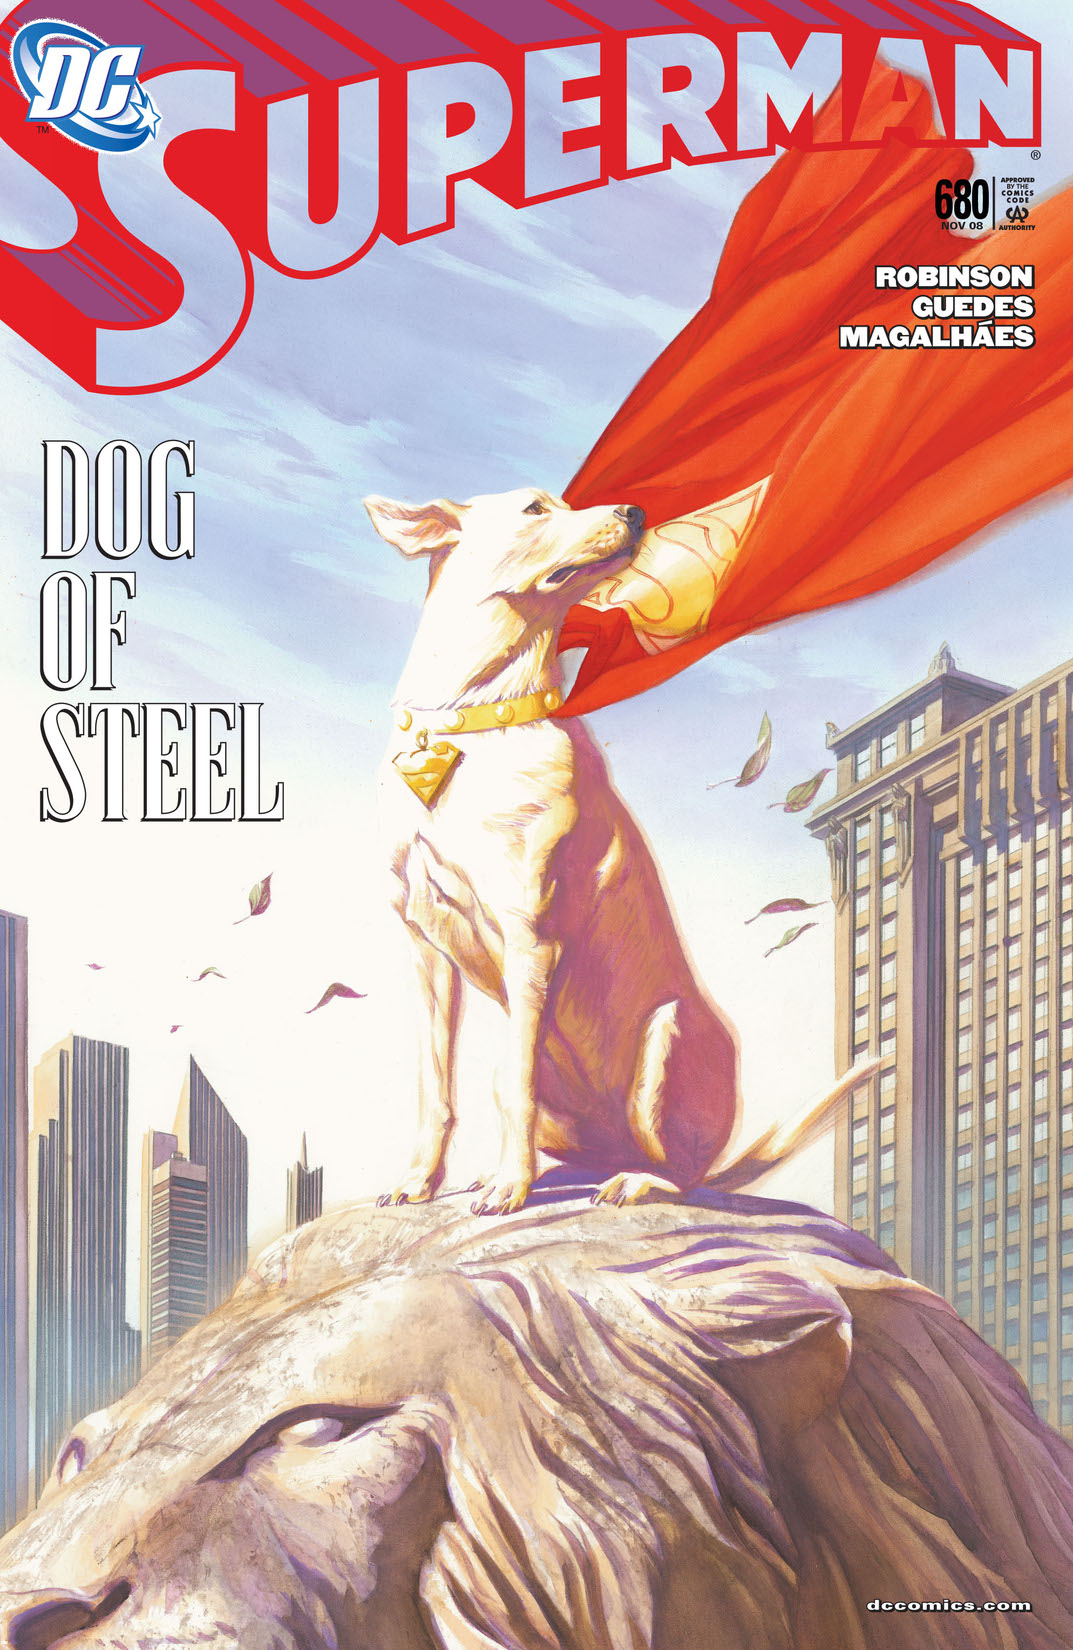 Superman (2006-) #680 preview images